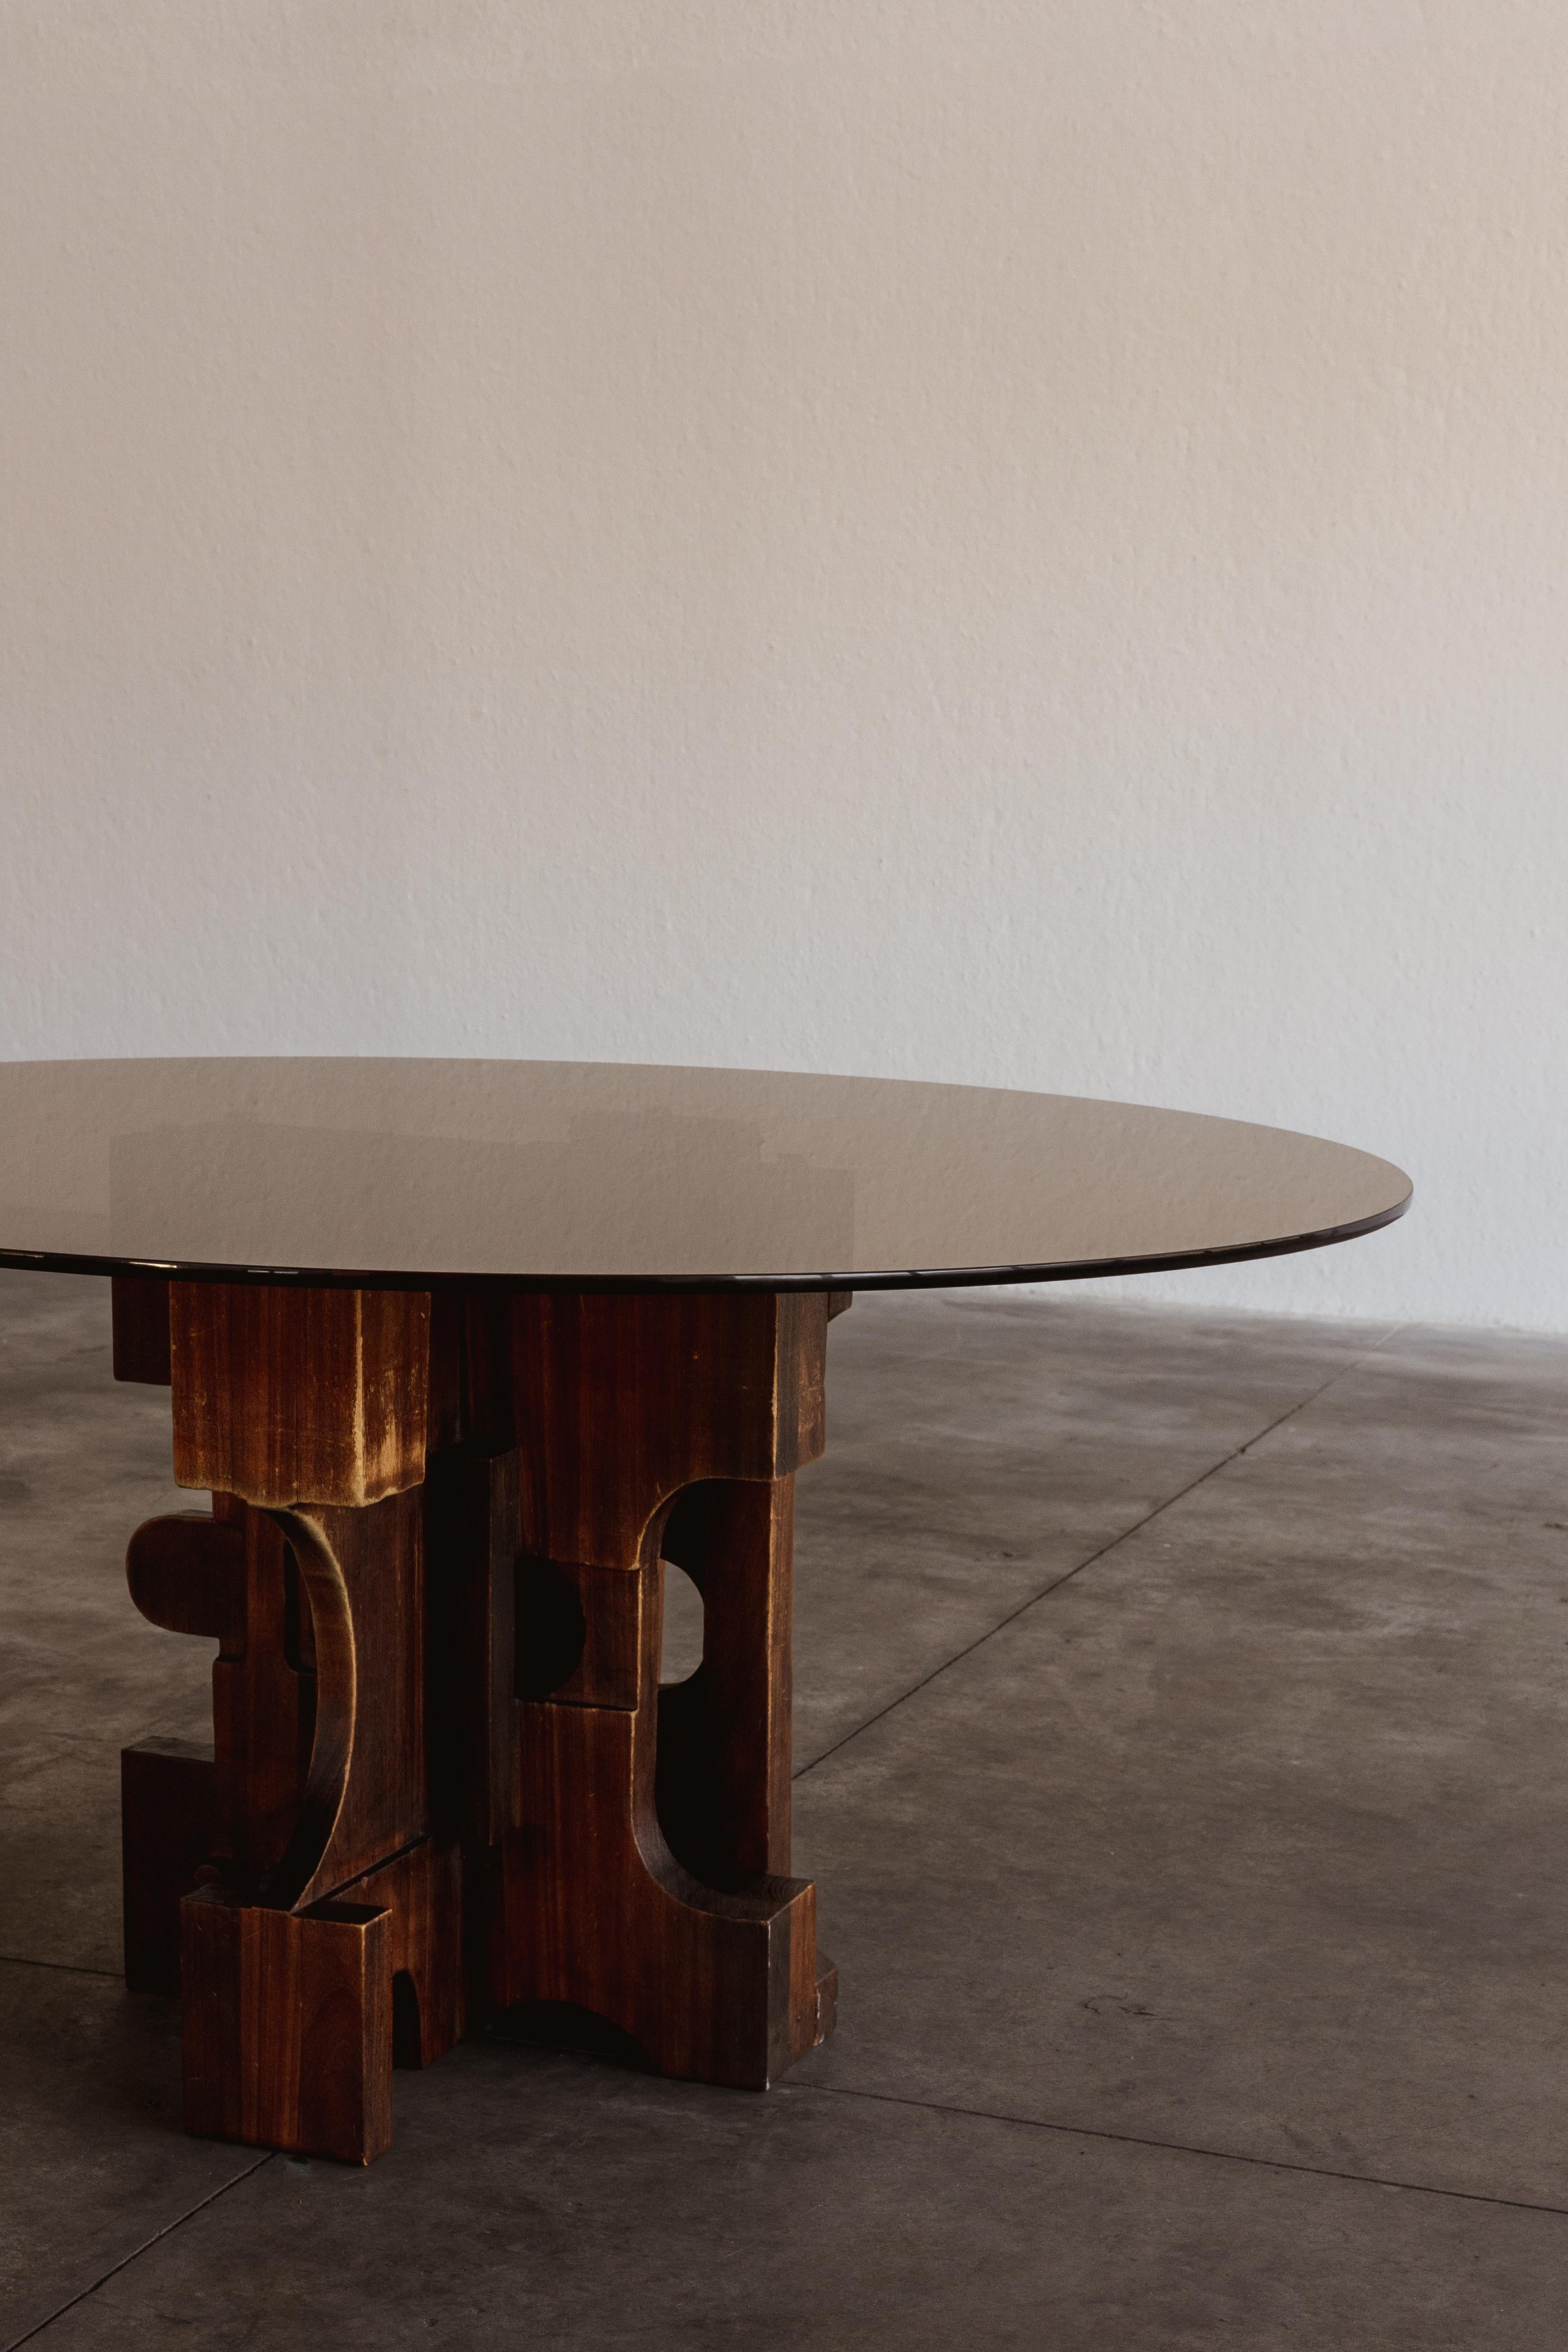 Nerone & Patuzzi Dining Table for Gruppo NP2, 1970s For Sale 8